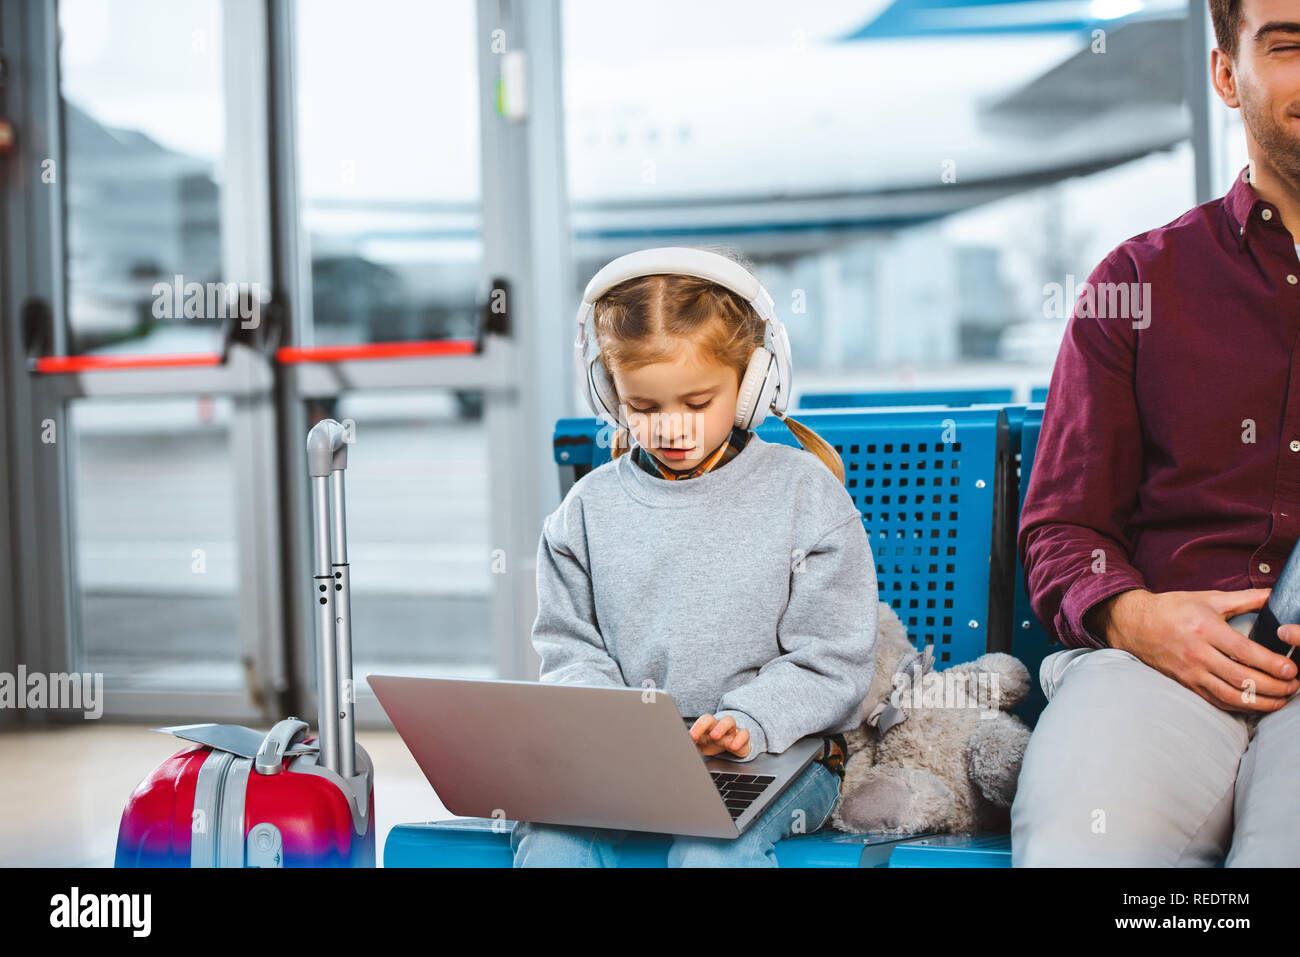 adorable child in headphones using laptop near dad in waiting hall Stock Photo